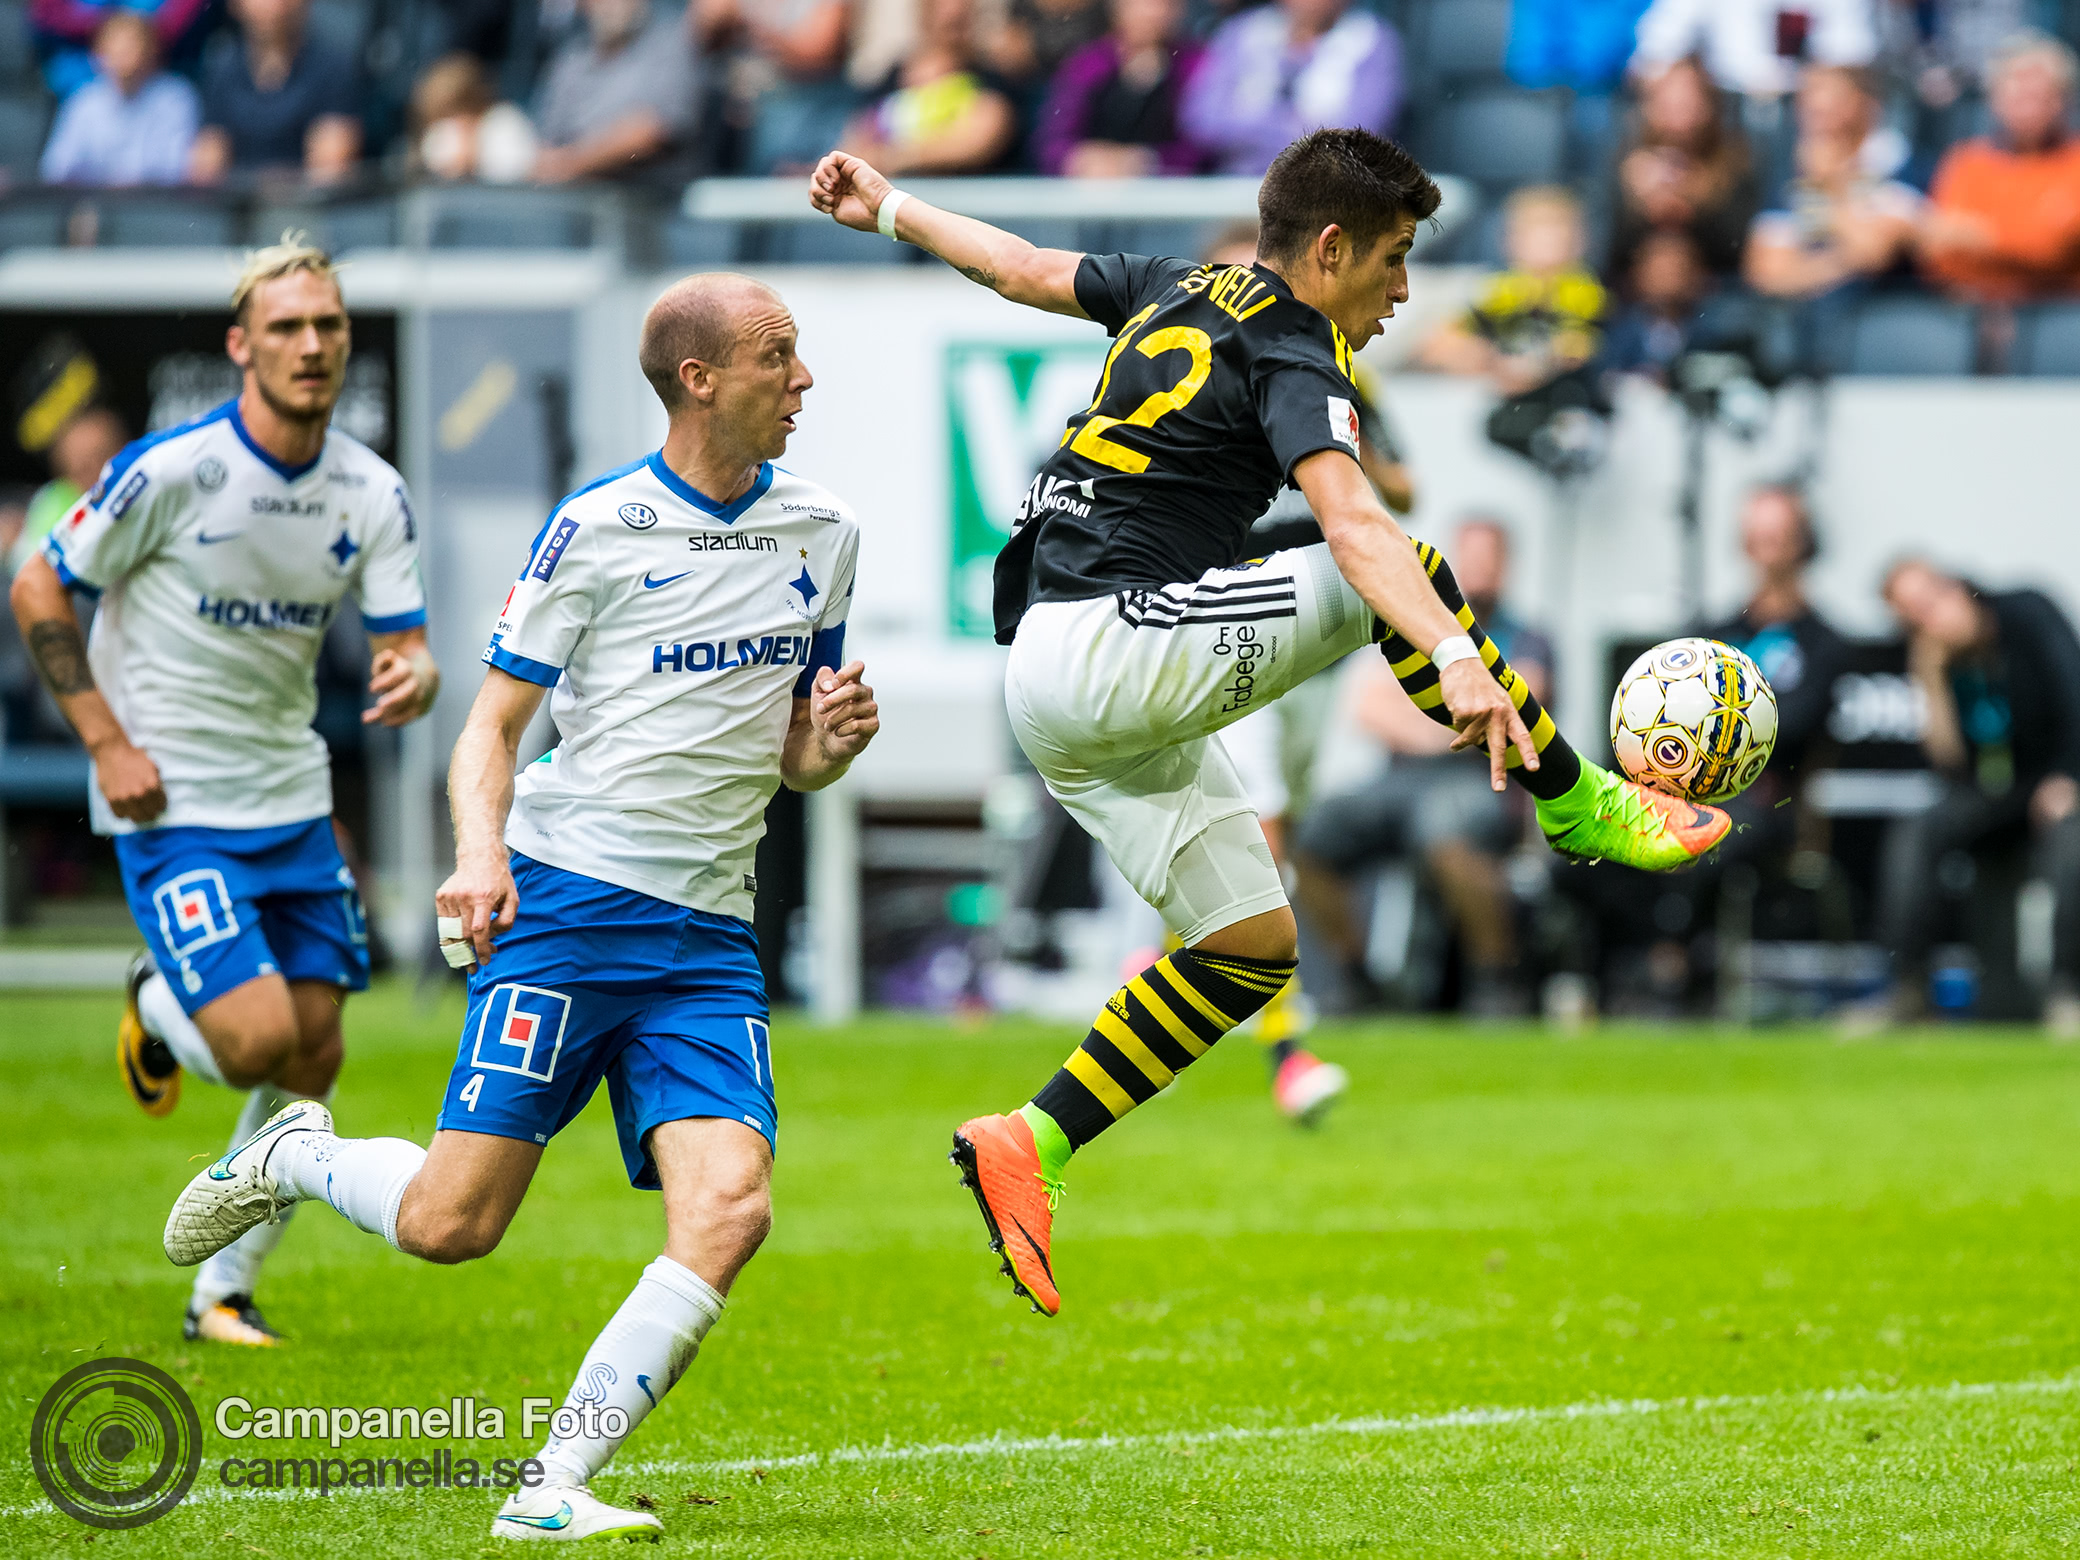 Own goal gives AIK the win - Michael Campanella Photography